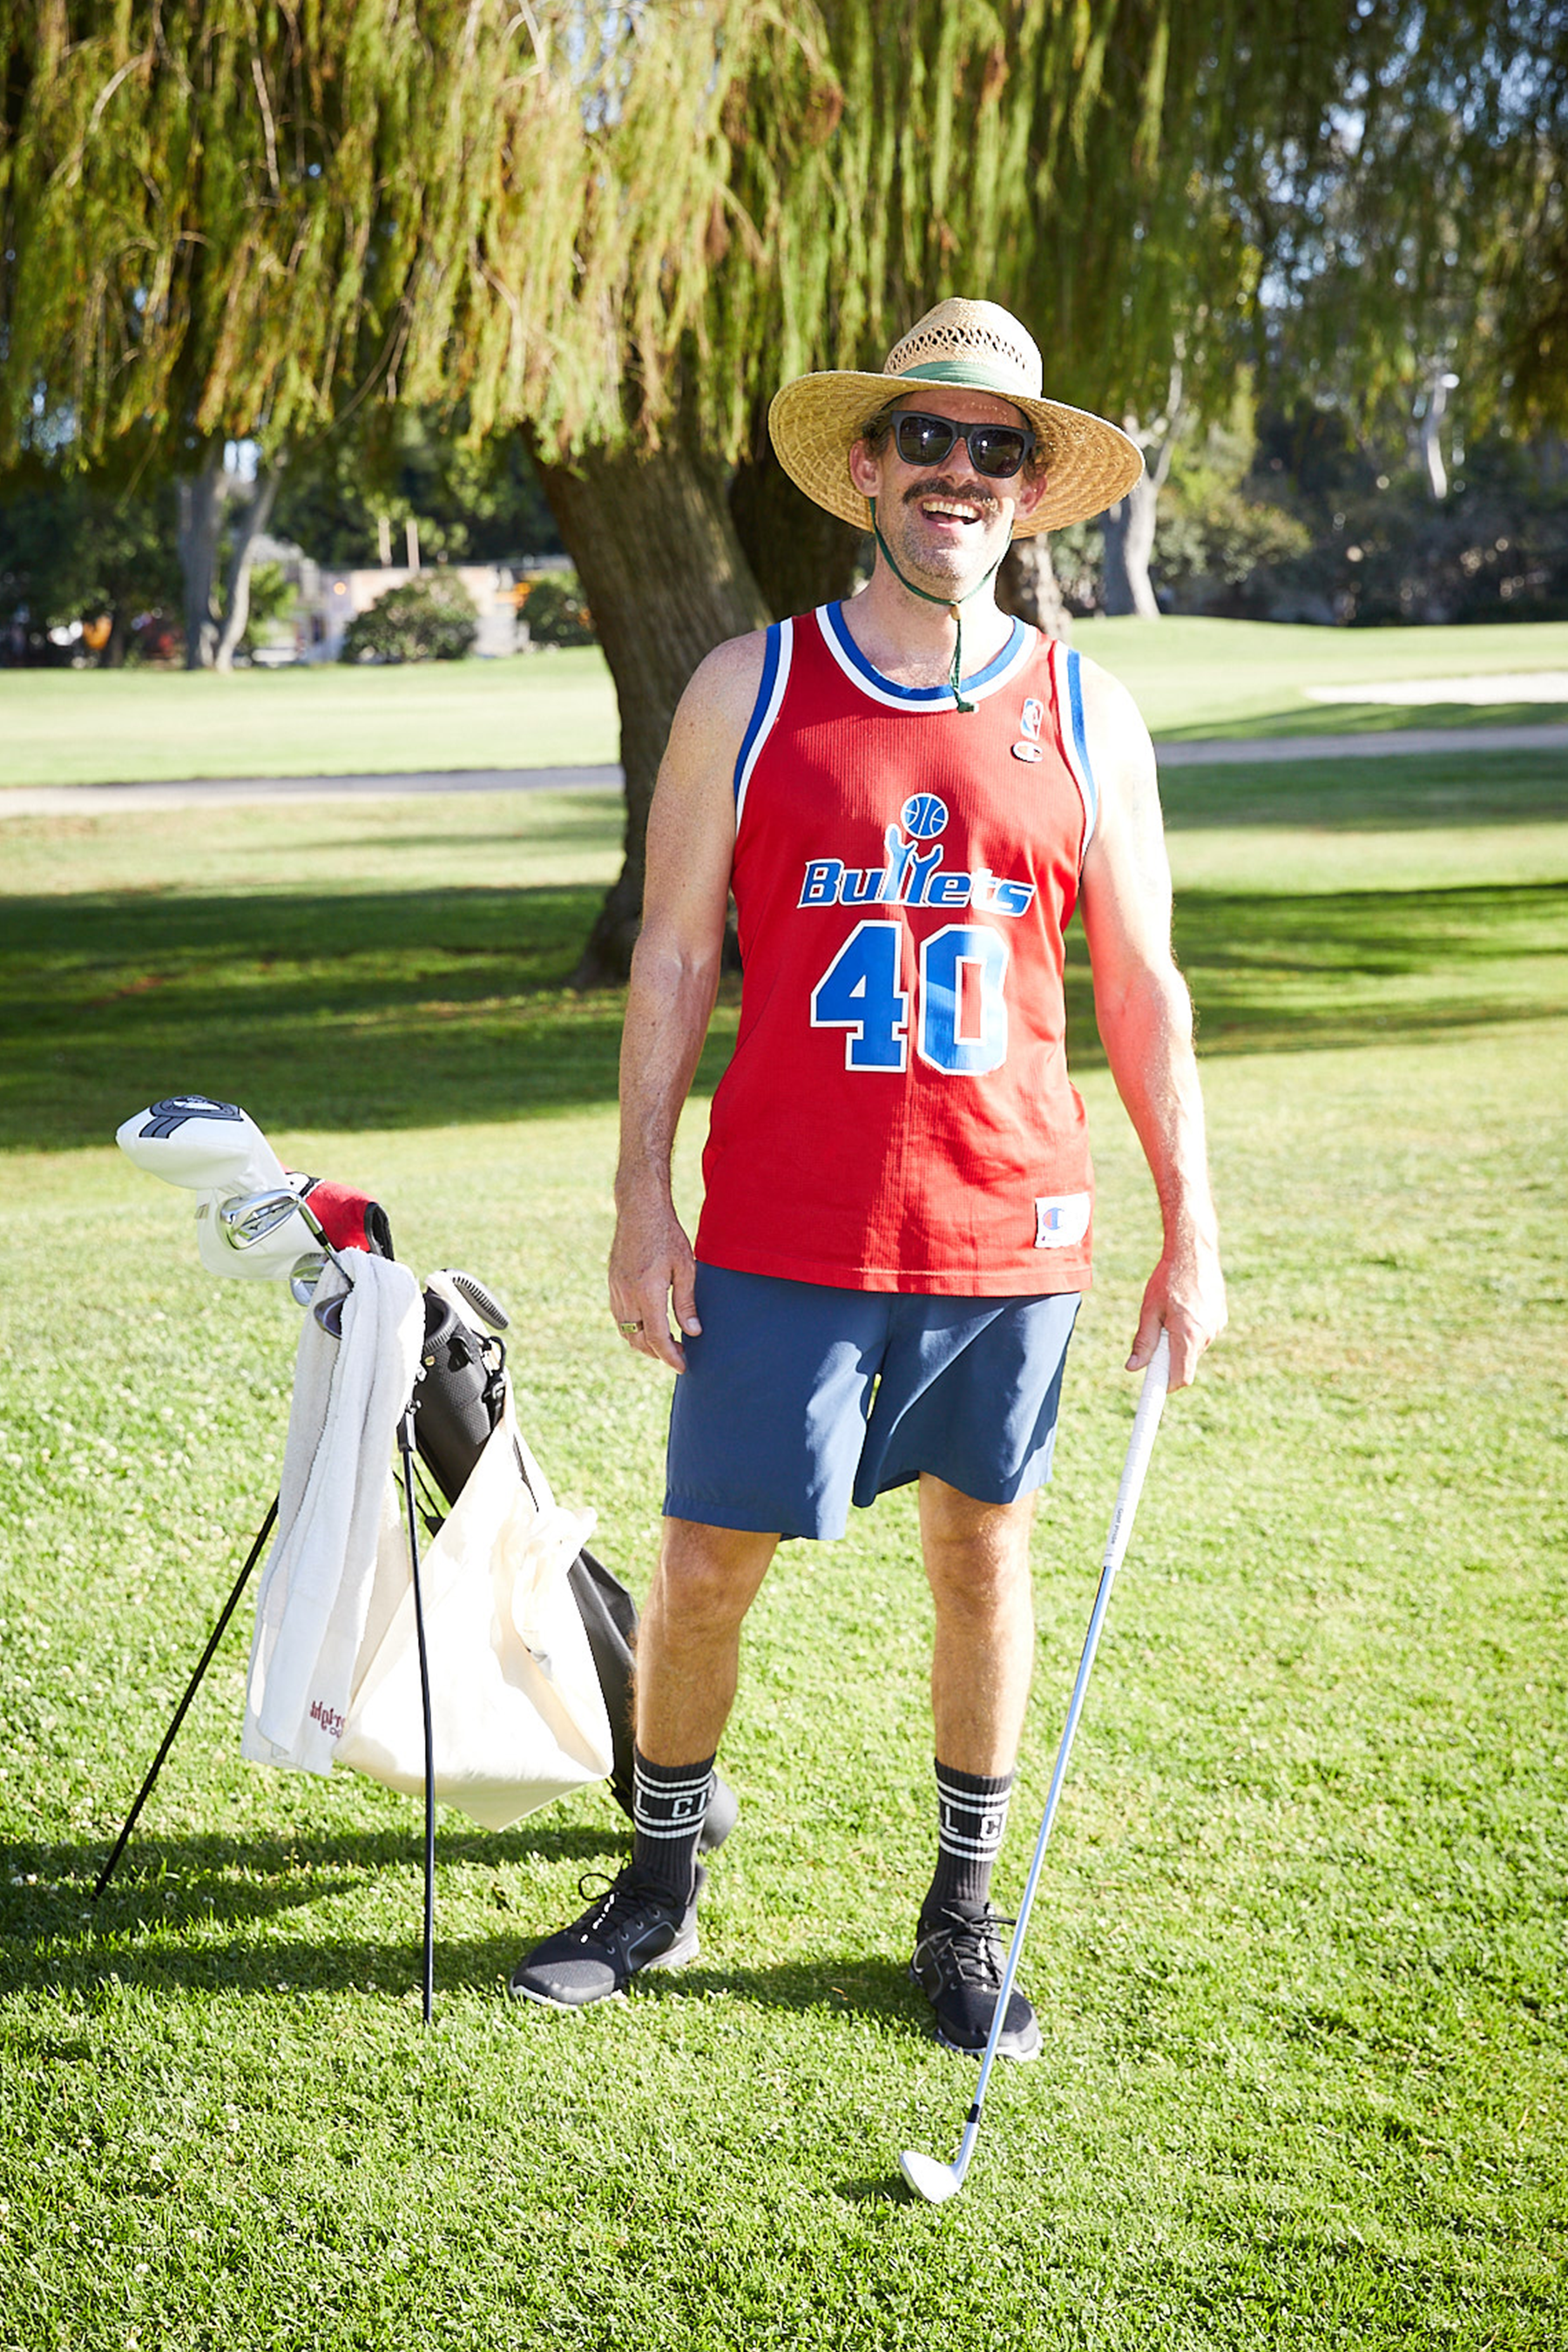 A man wearing a red jersey and a wide brim hat on the golf course